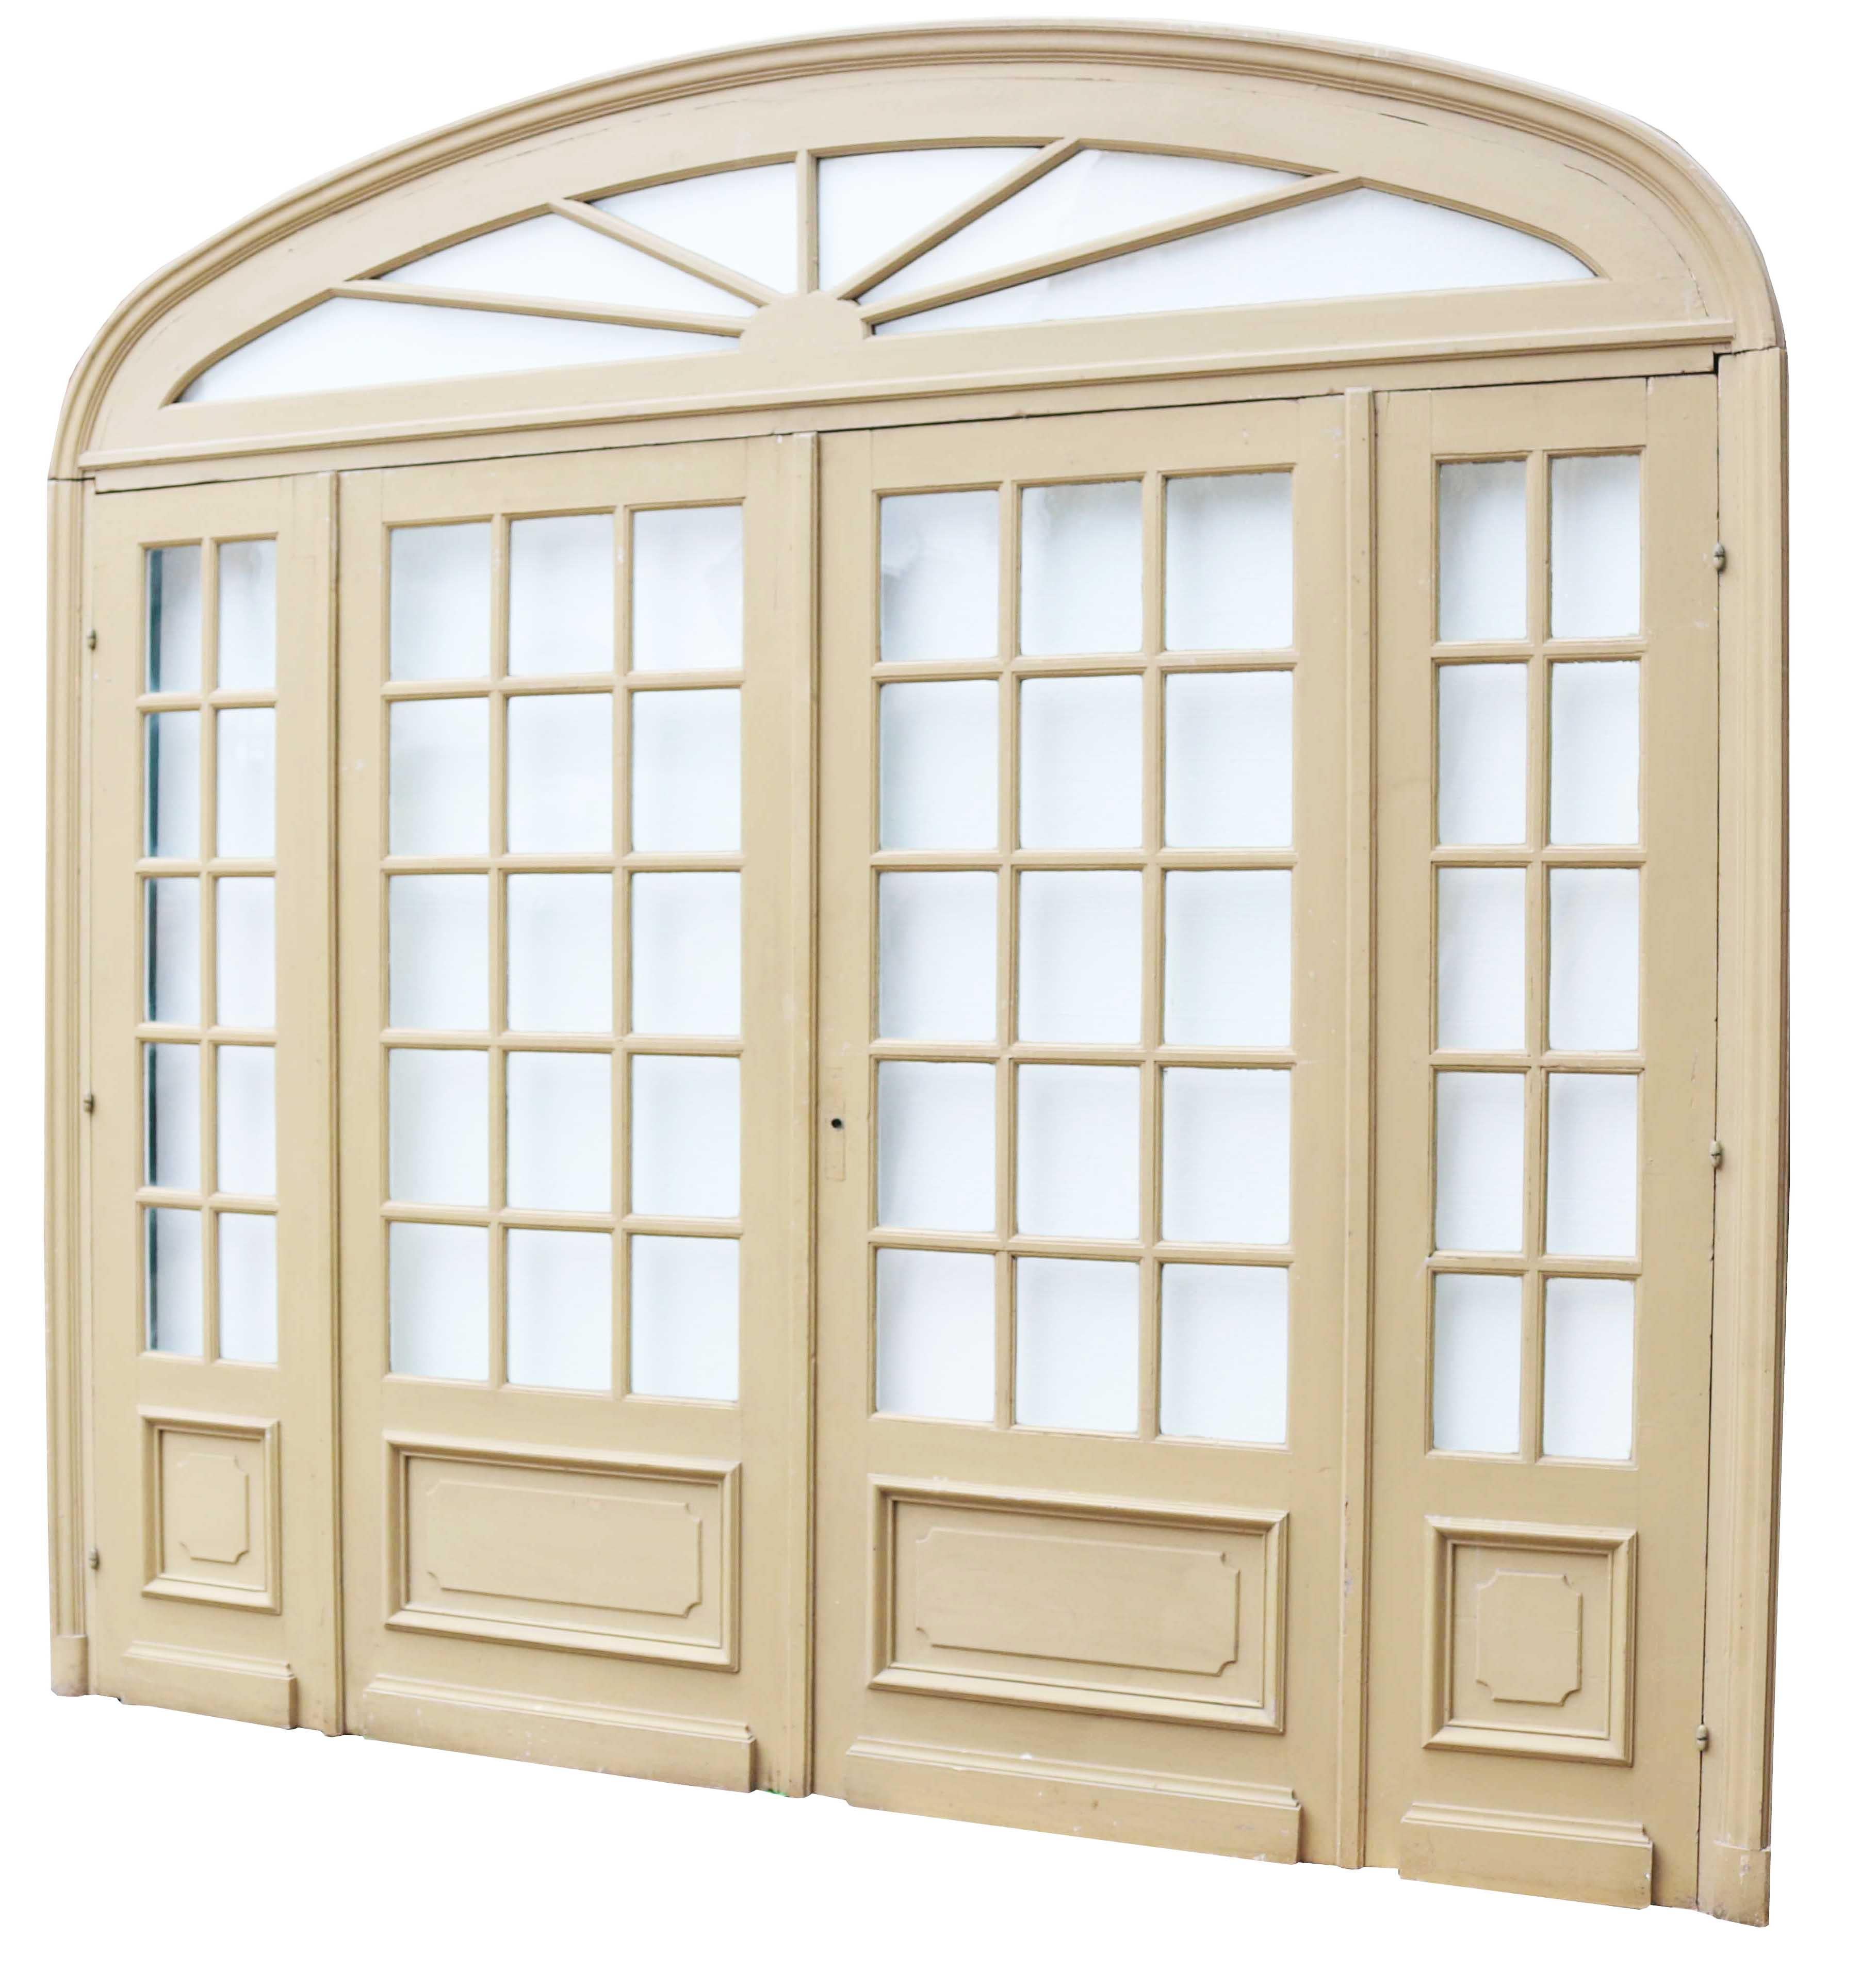 About

This impressive room divider features an over window and raised and fielded panels. For internal use only.

Condition report

The glazing is all intact with no breaks or cracks. There is one small piece of a foot block missing on one